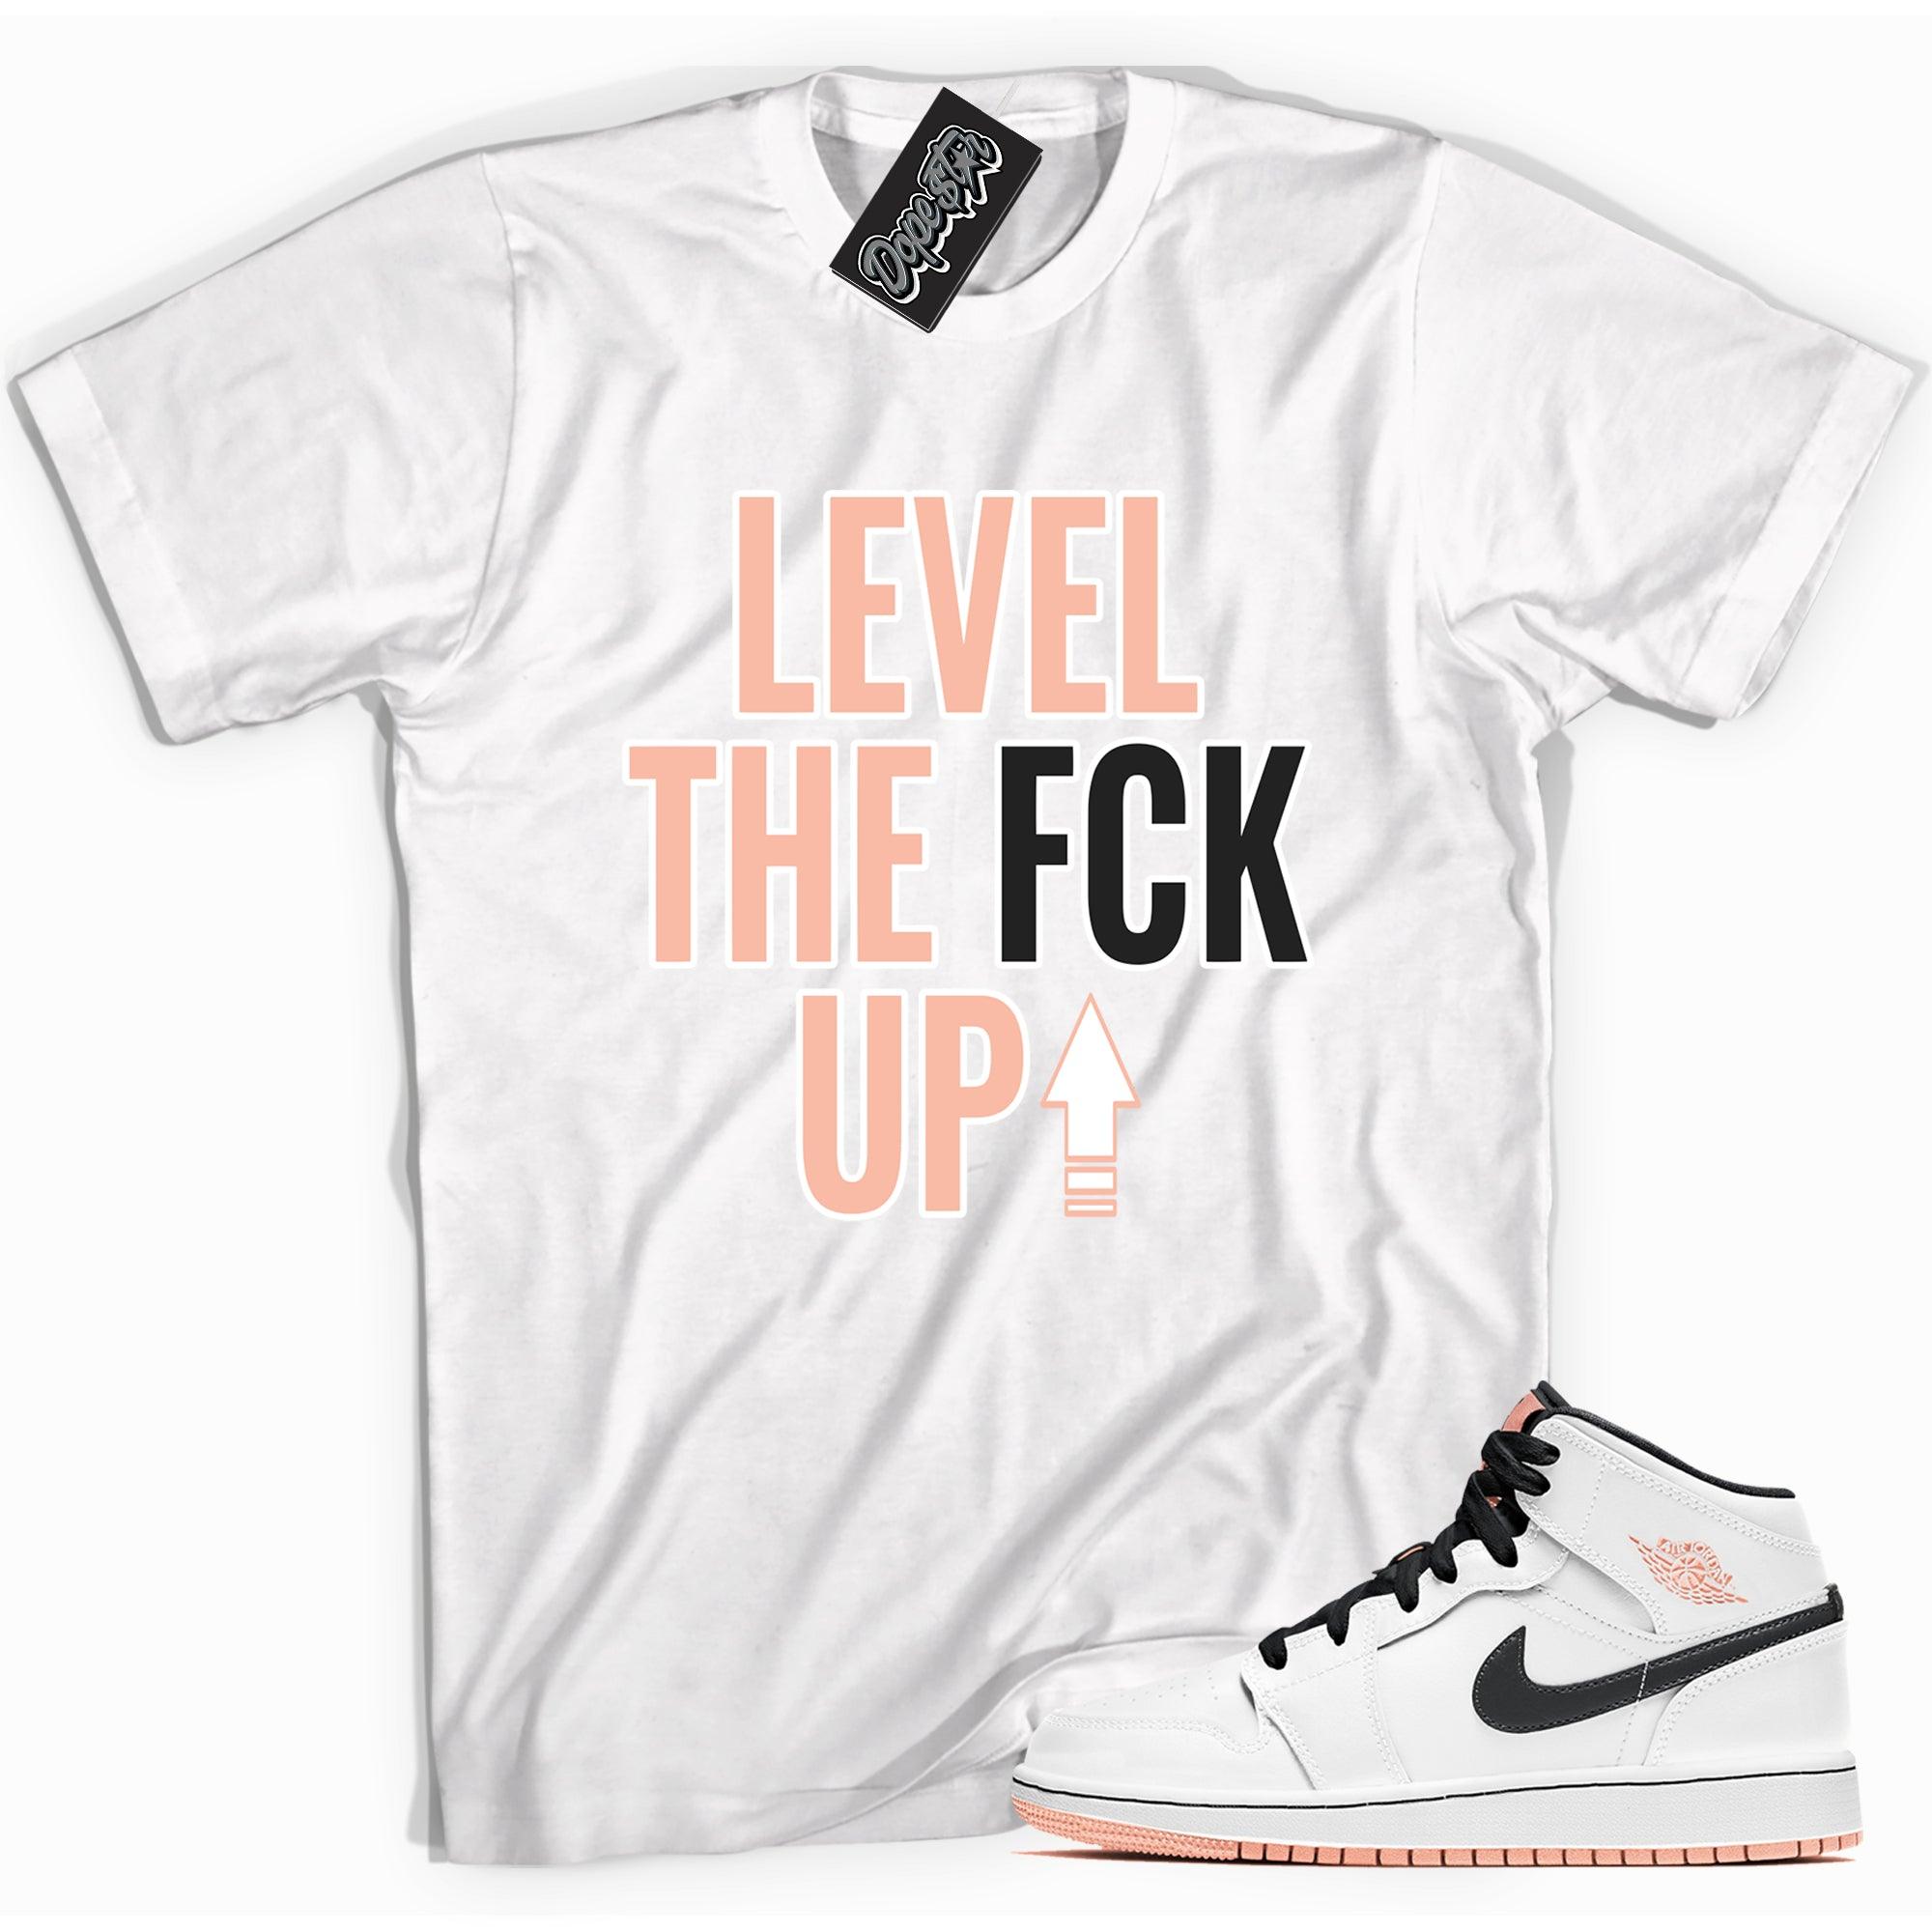 Cool white graphic tee with 'Level Up' print, that perfectly matches Air Jordan 1 Mid Arctic Orange sneakers.